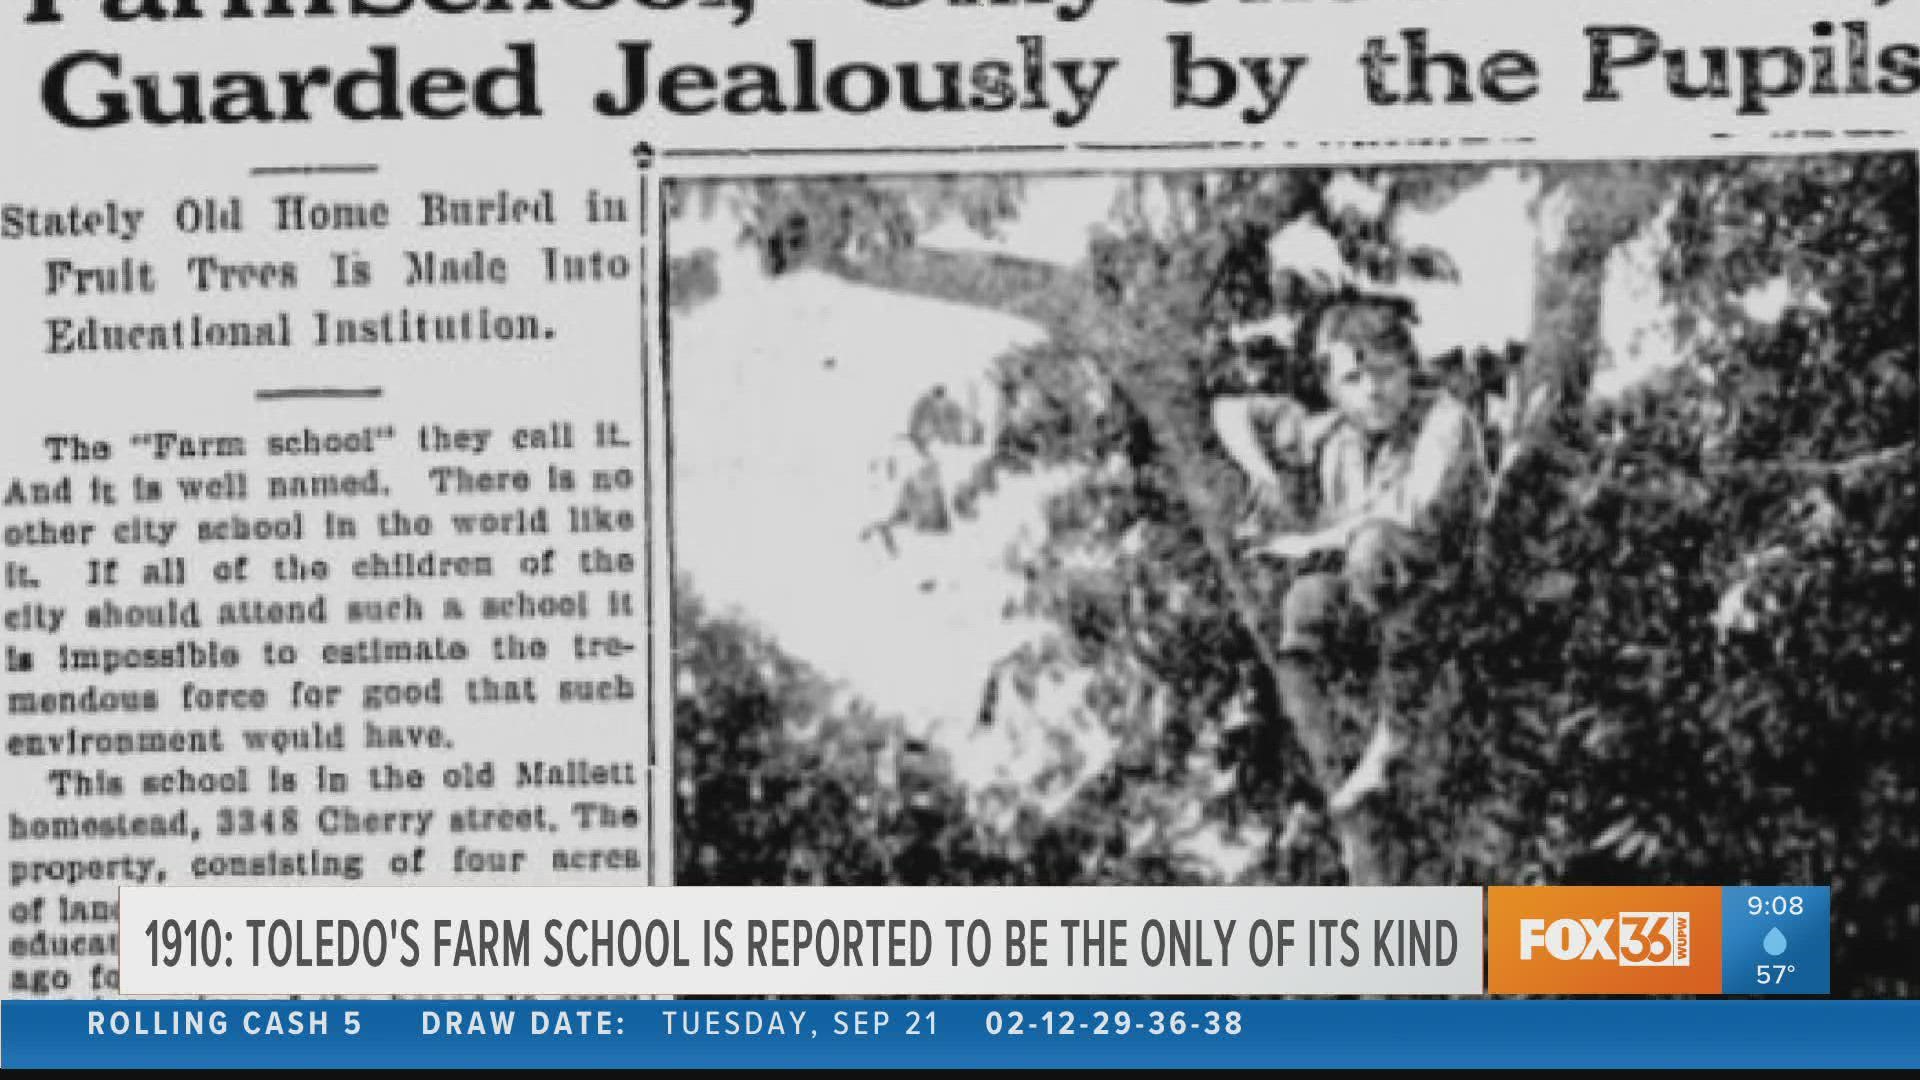 In 1910, it's reported that the so-called "farm school" in the 3300 block of Cherry Street of Toledo is the only one of its kind in the world.